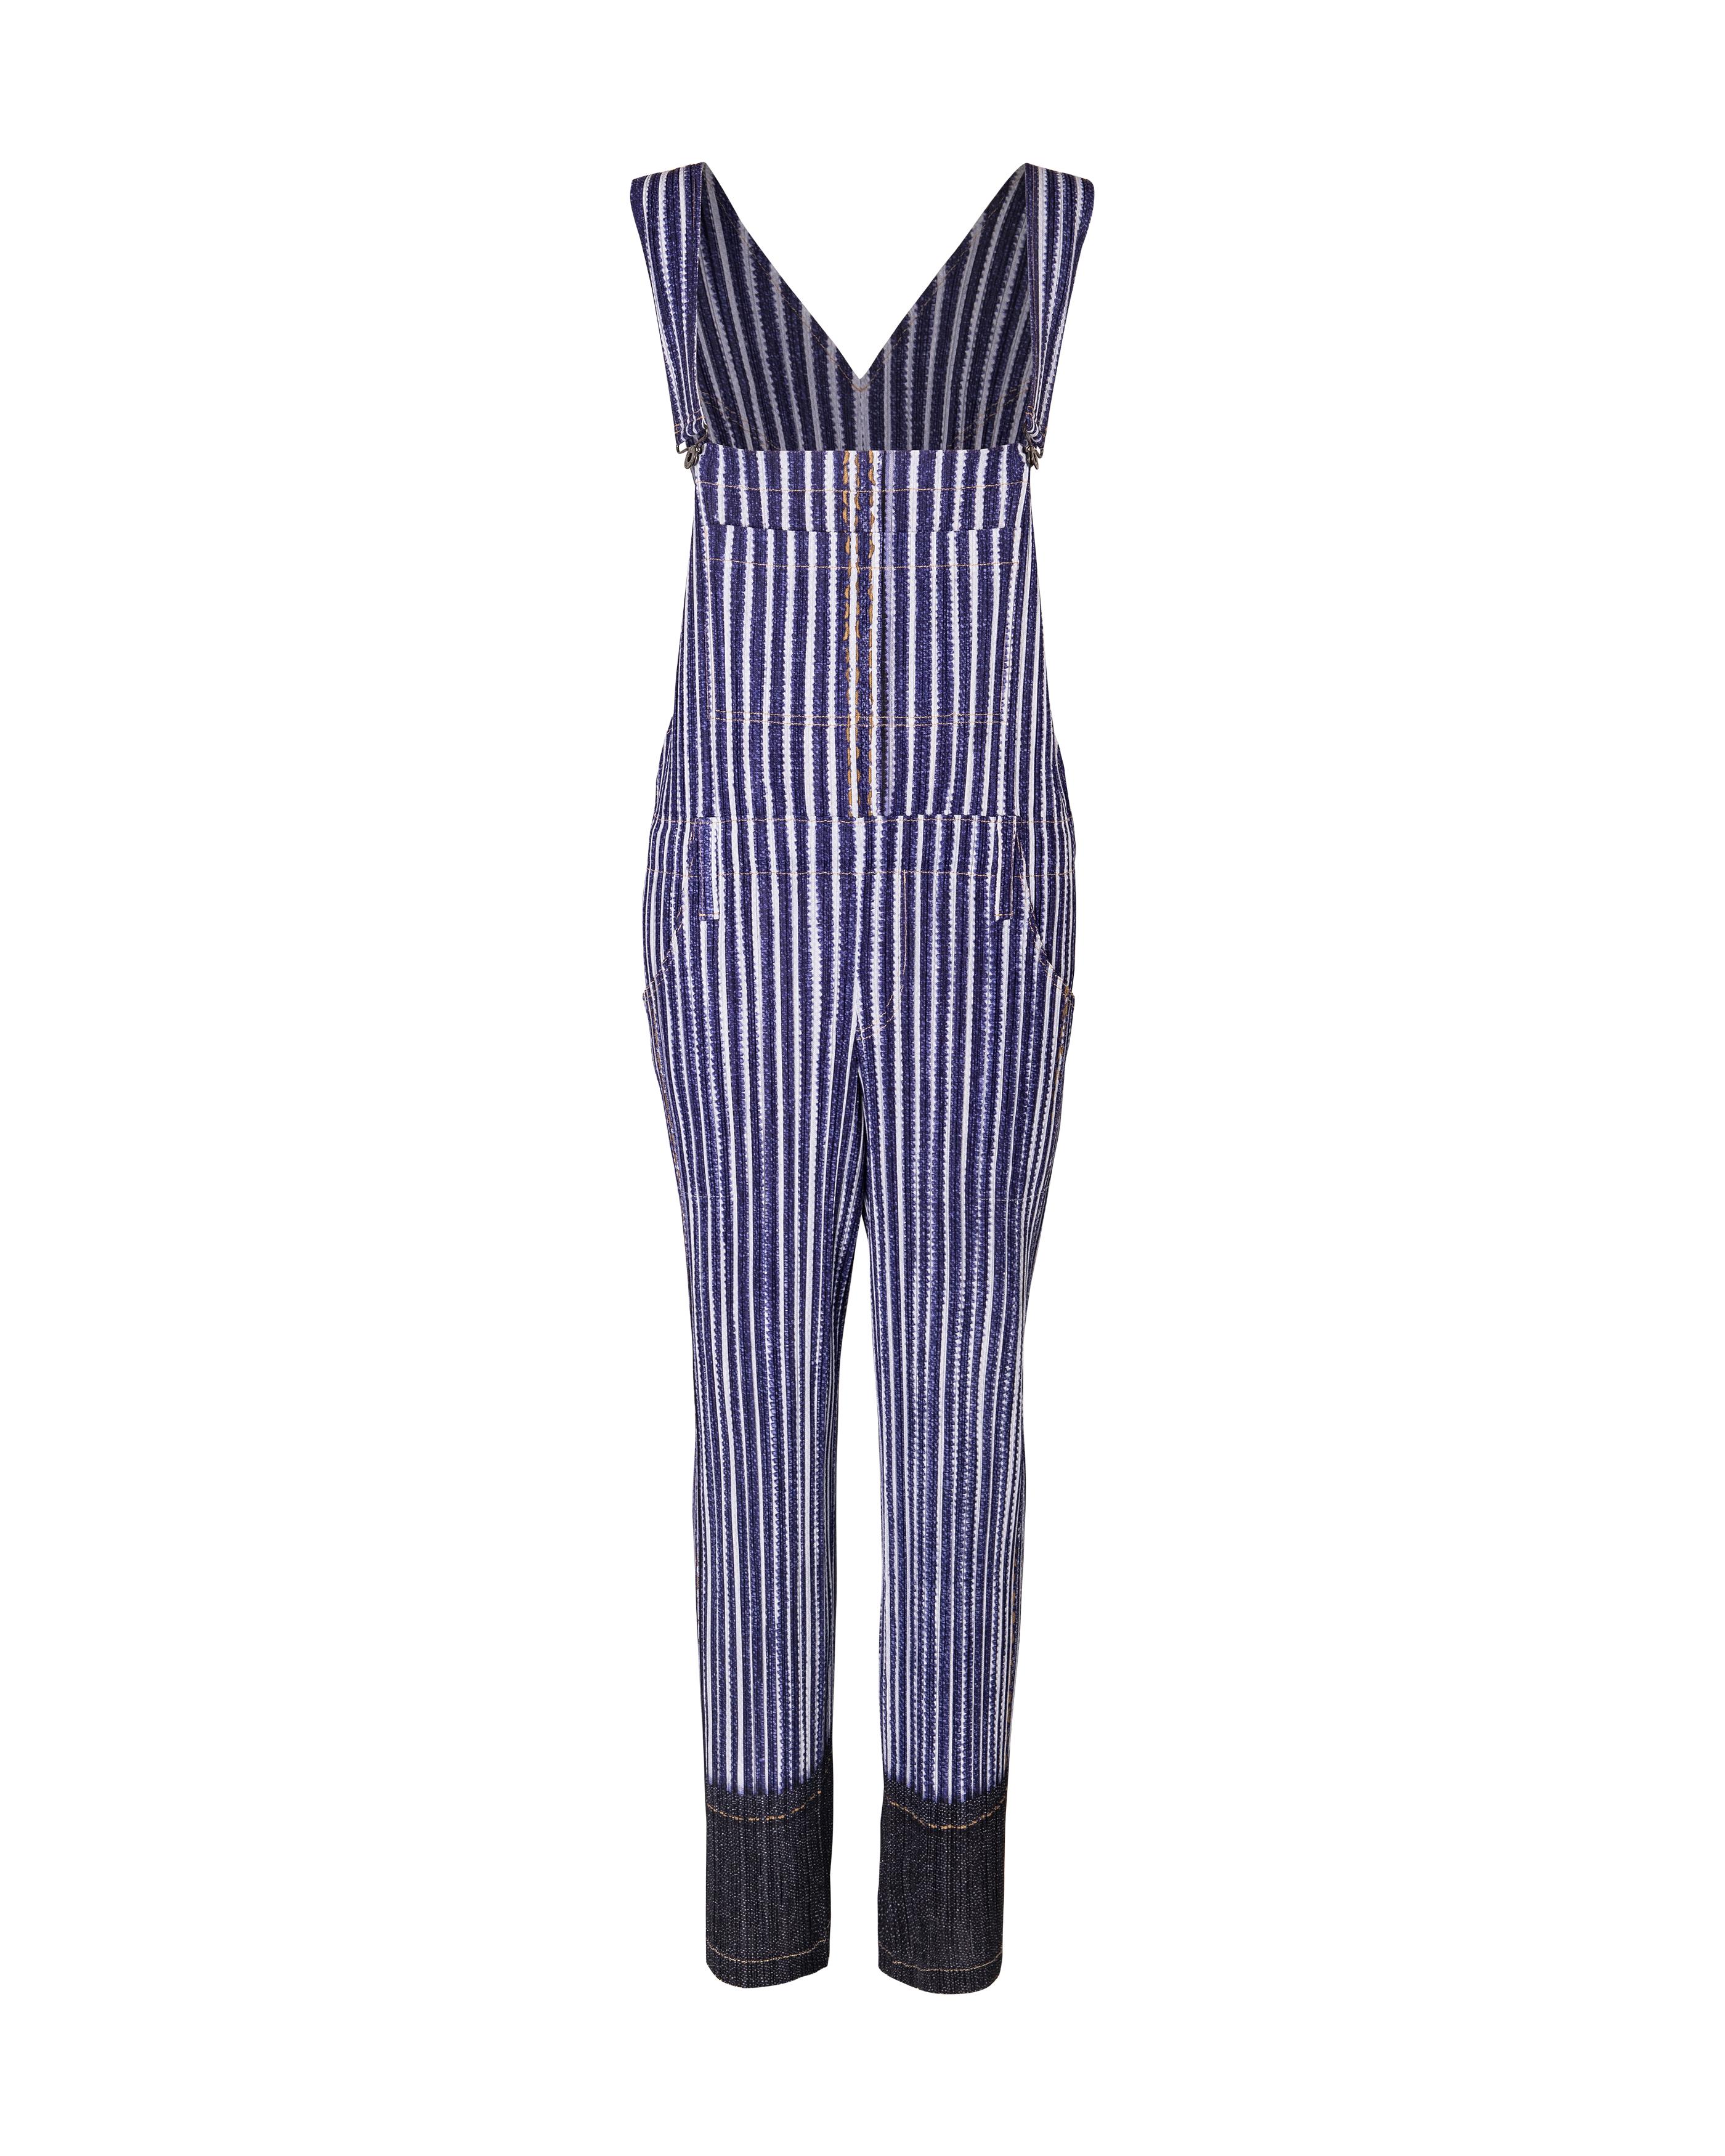 Women's 1990's Issey Miyake Pleated Blue and White Overalls